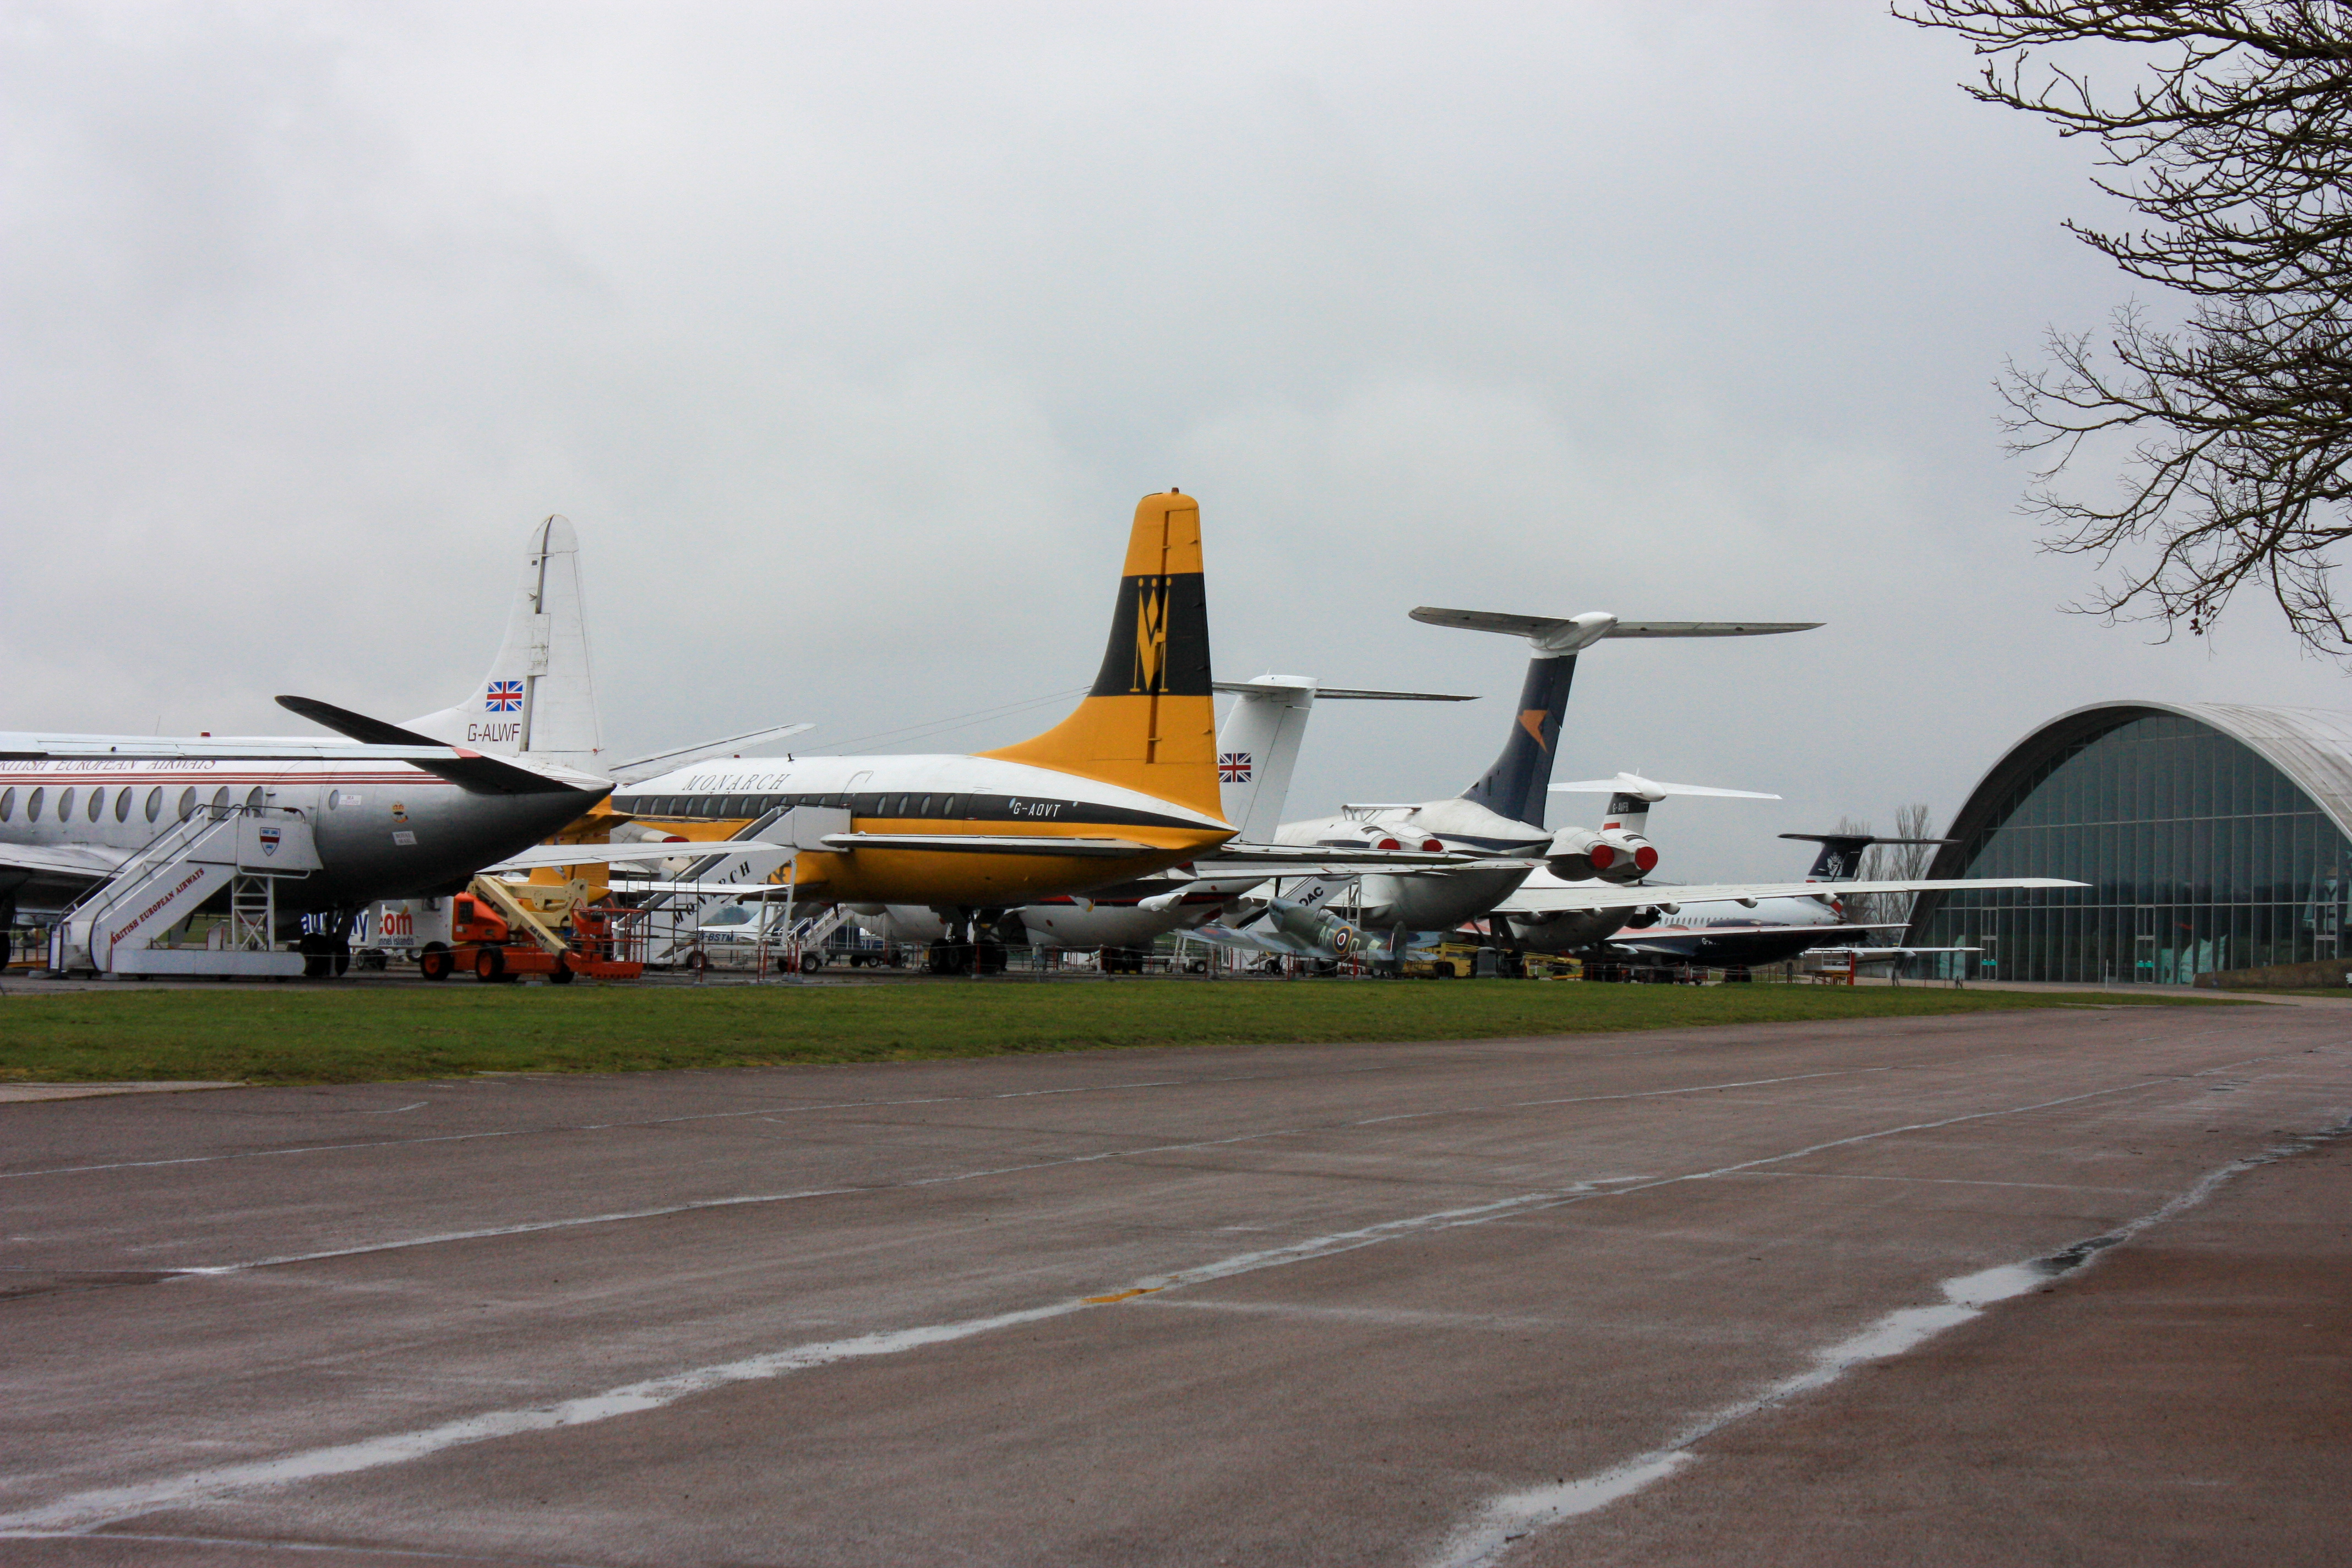 Photo of several large aeroplanes on display, with the American Museum in the distance.